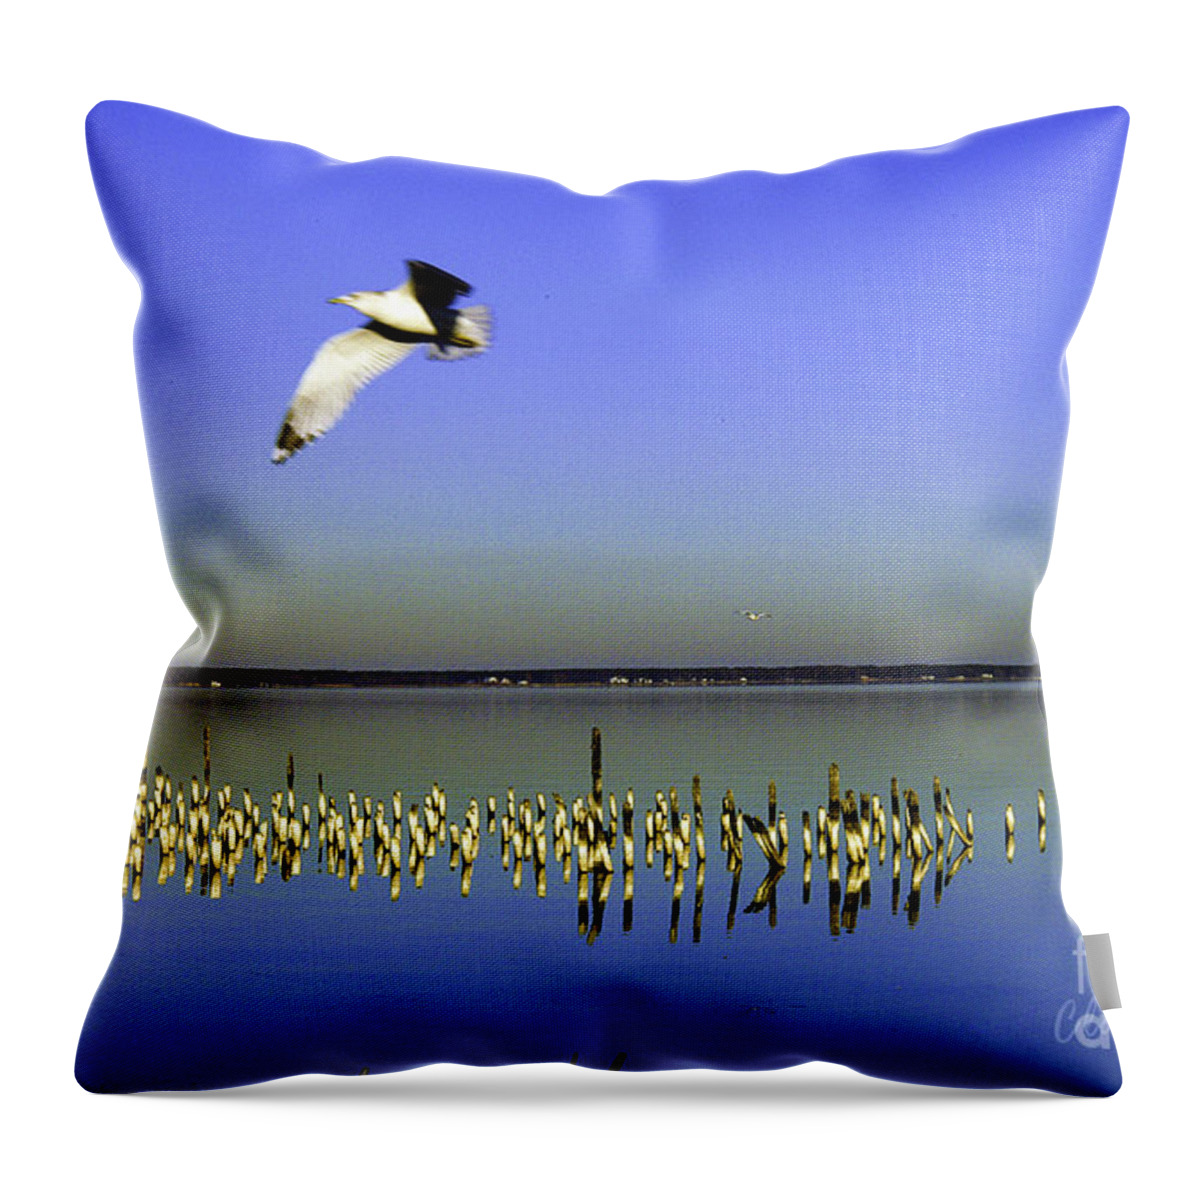 Art Throw Pillow featuring the photograph Flying Solo by Clayton Bruster